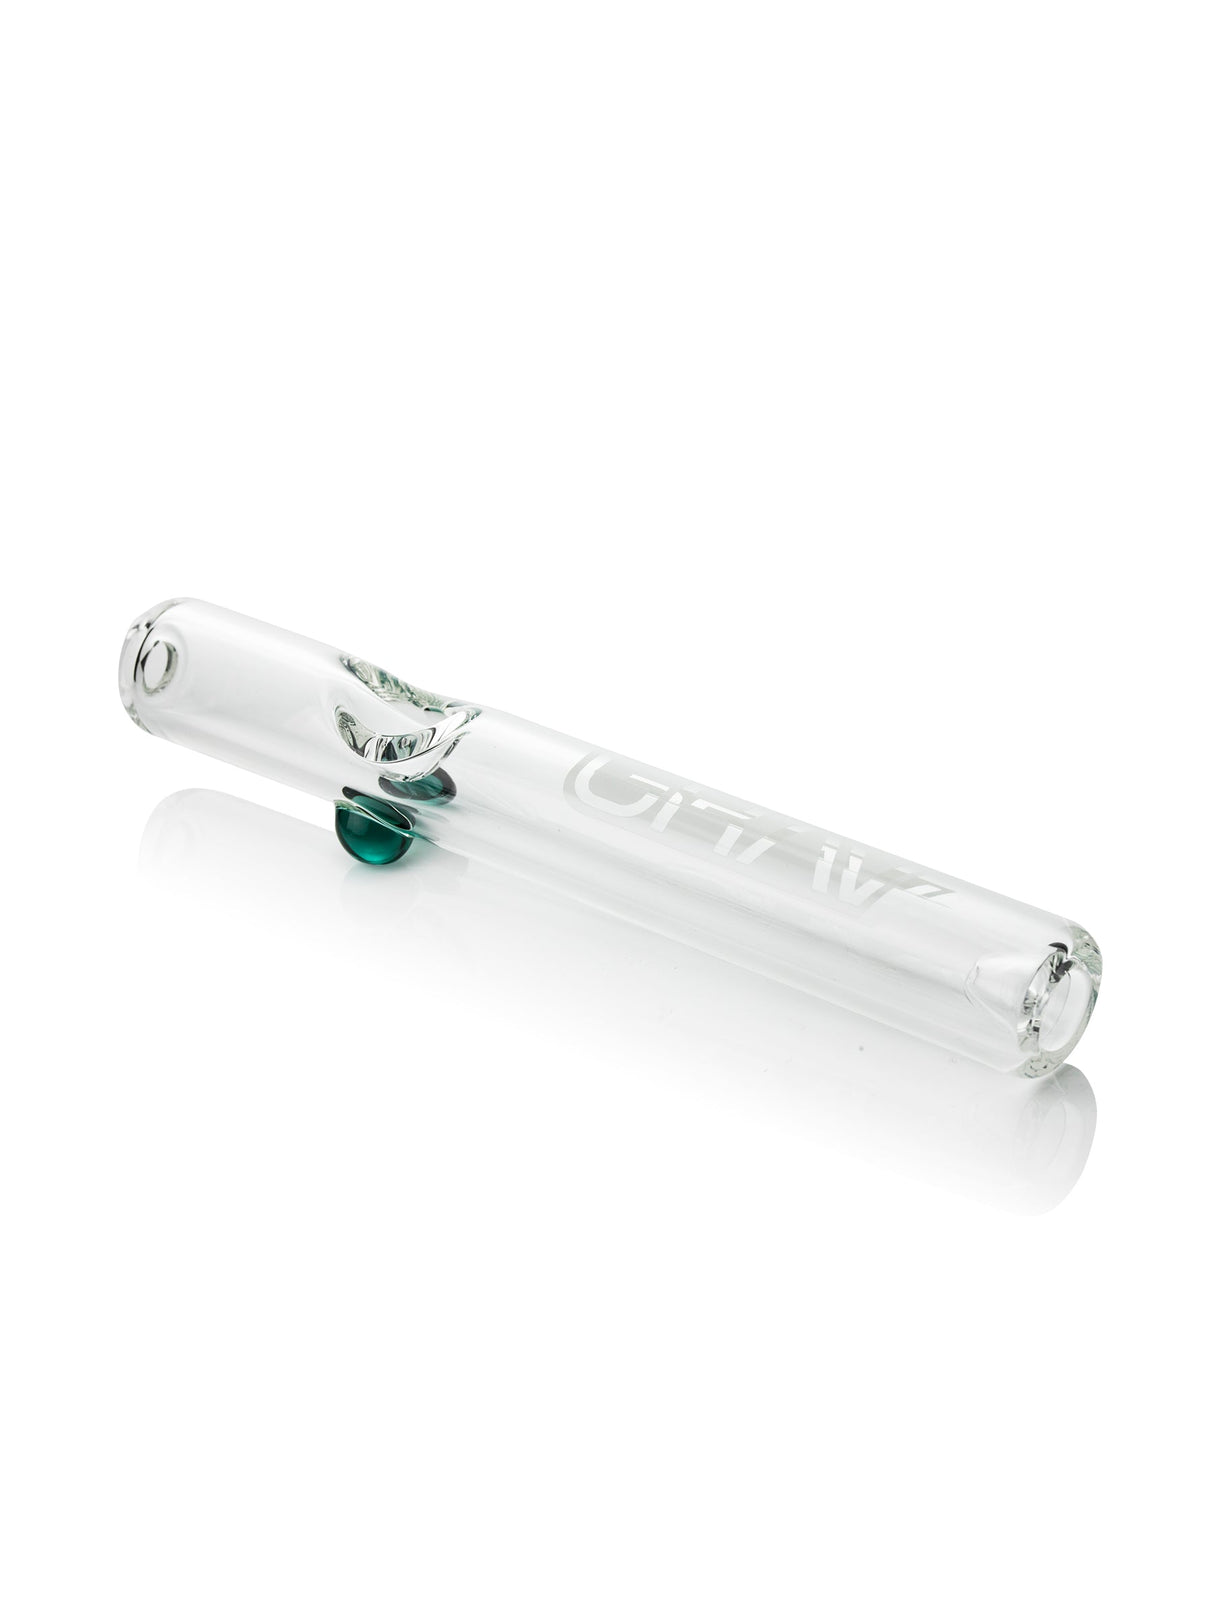 GRAV Clear Classic Steamroller - Clear - Etch Label